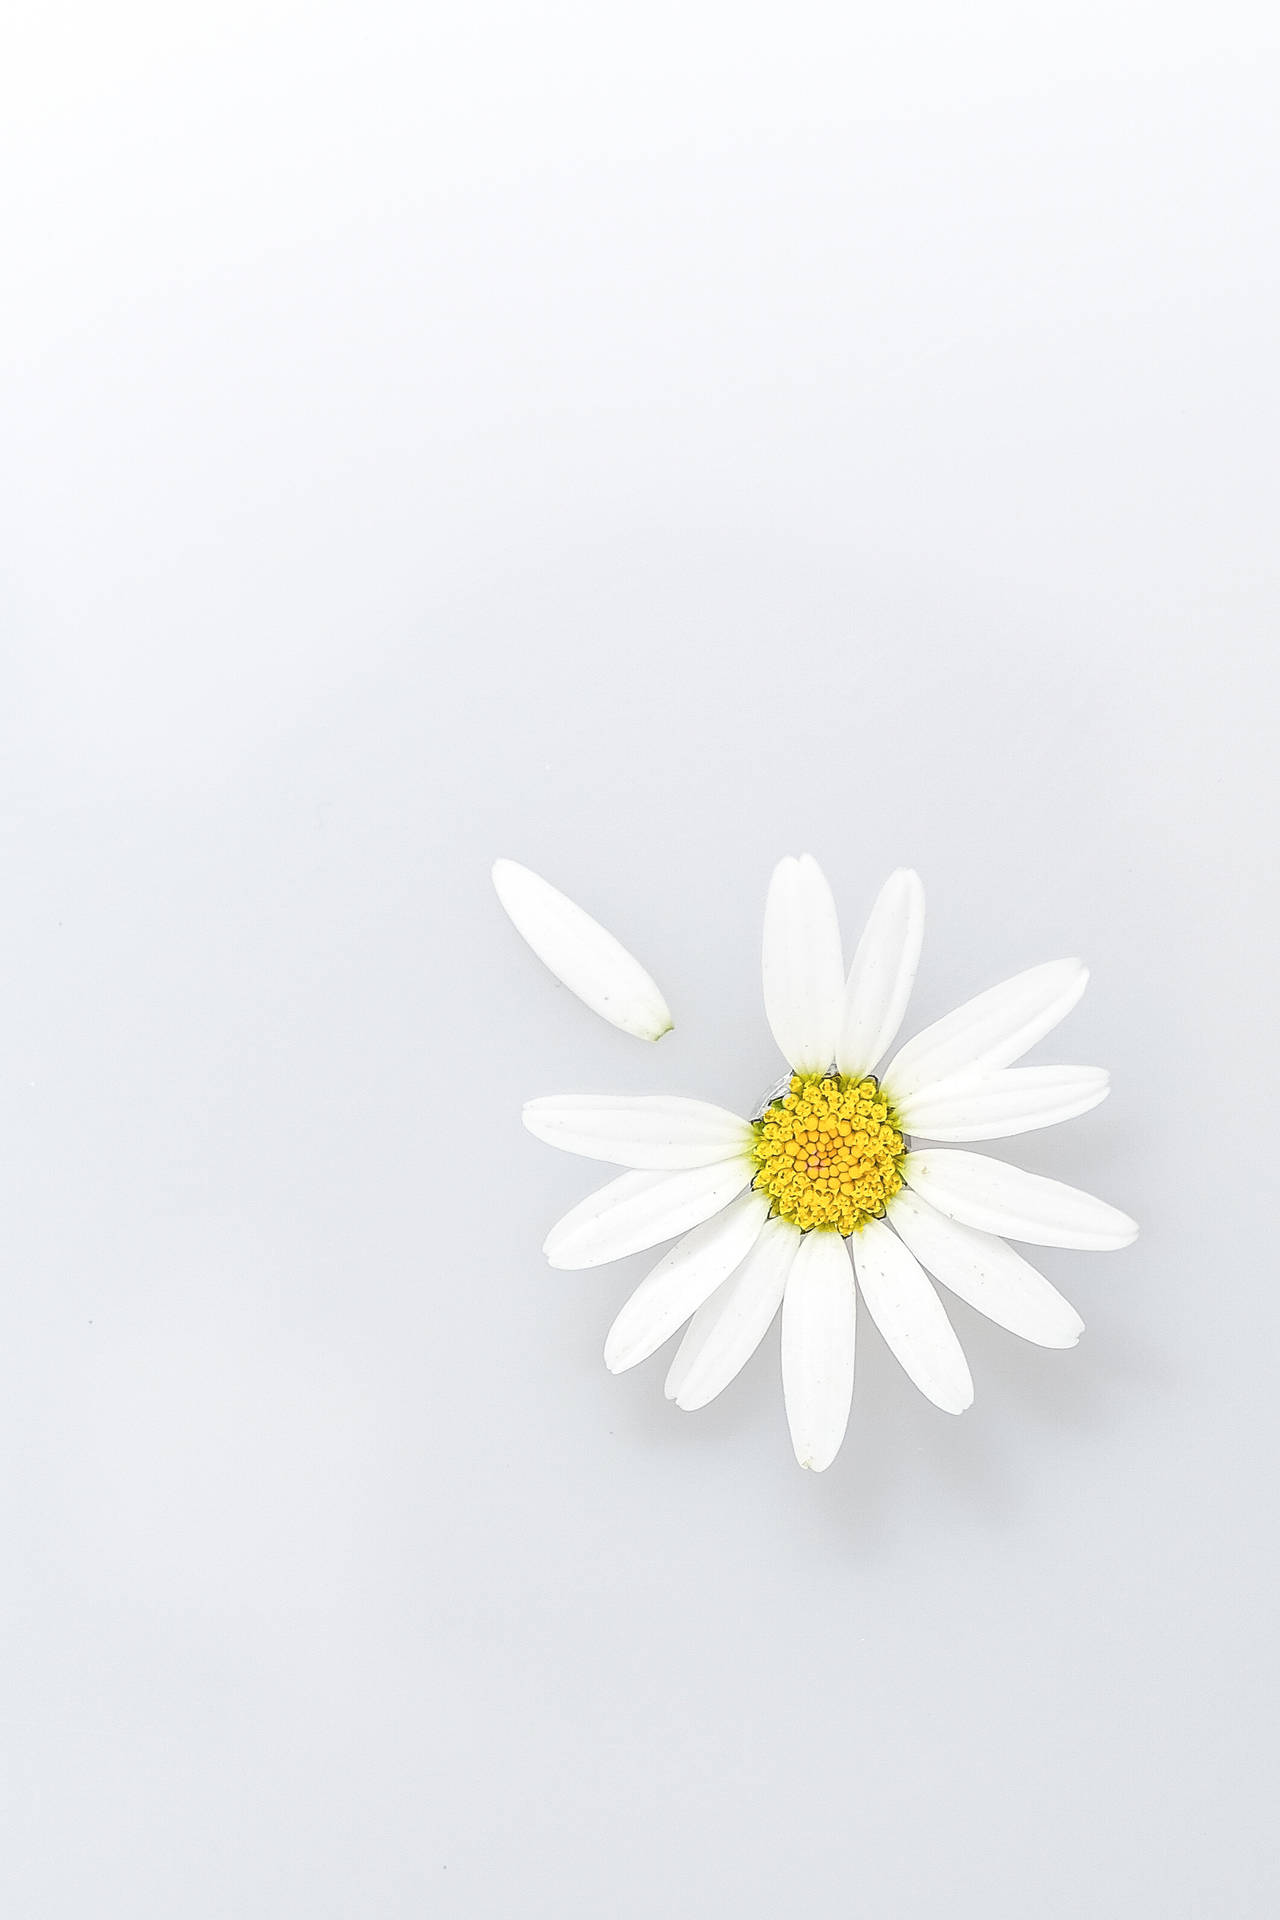 3000X4499 Daisy Wallpaper and Background